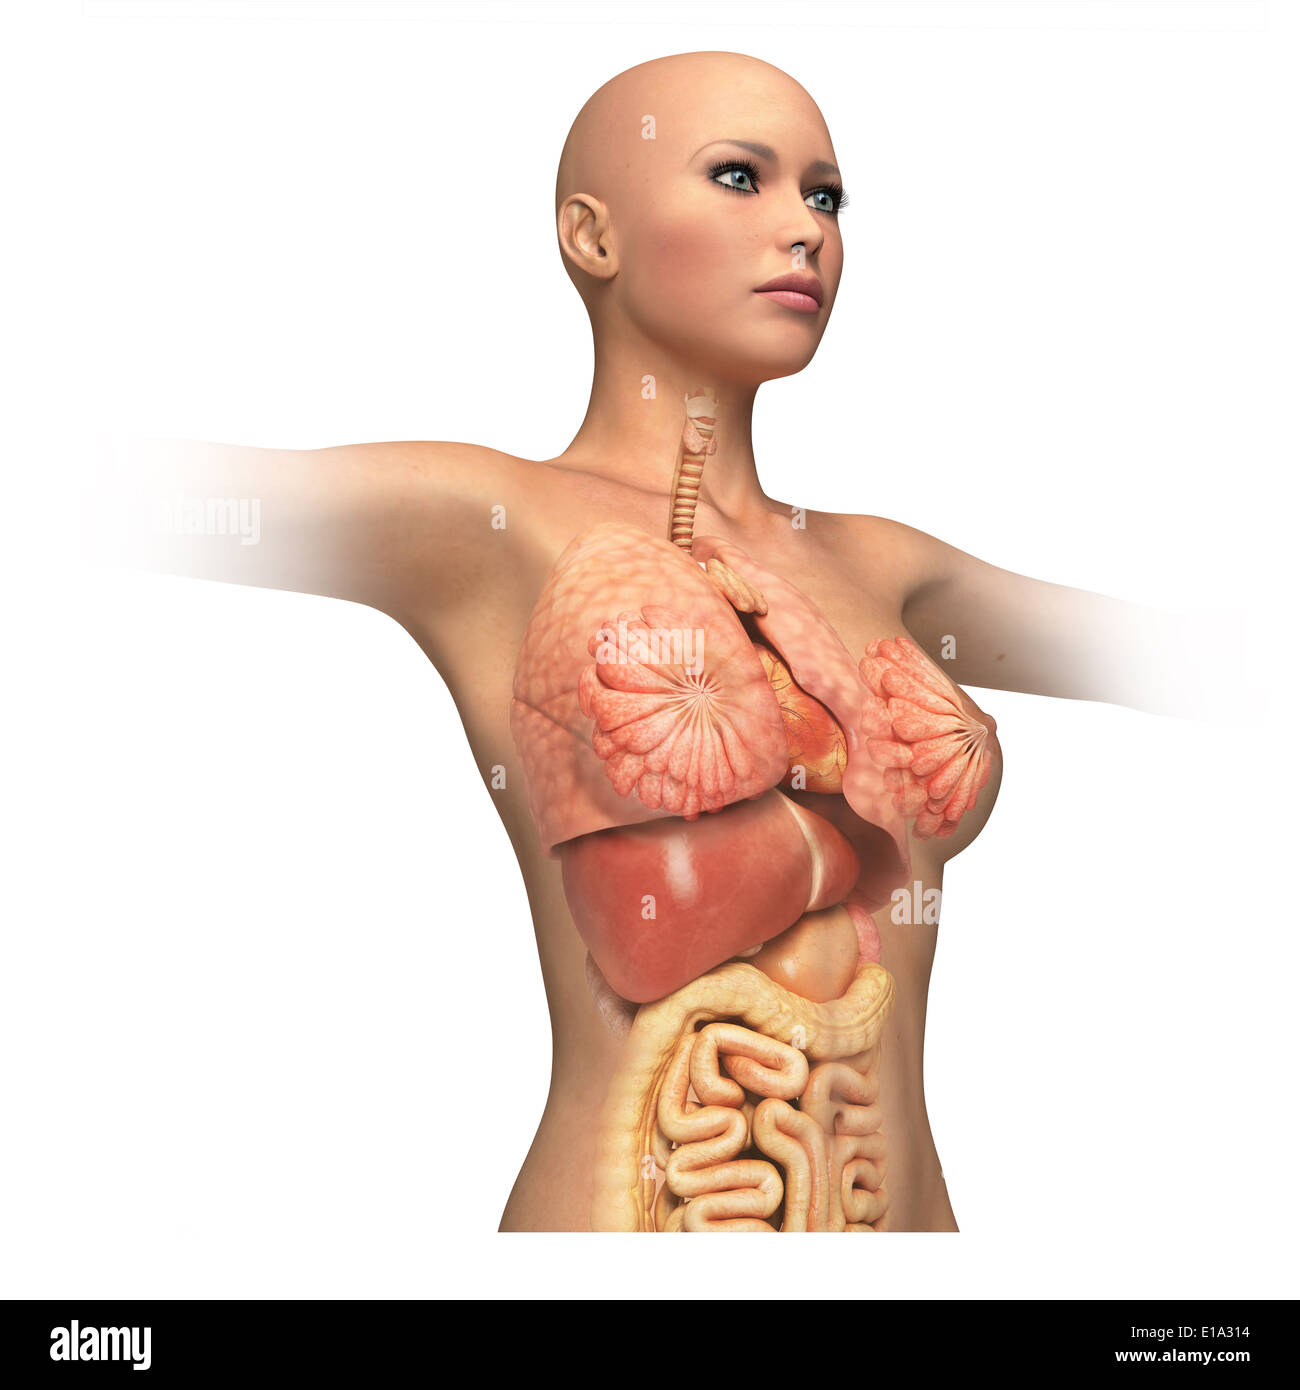 Motivar profundidad Desde allí Woman body trunk, with interior organs superimposed. On white background  and clipping path. Anatomy image Stock Photo - Alamy